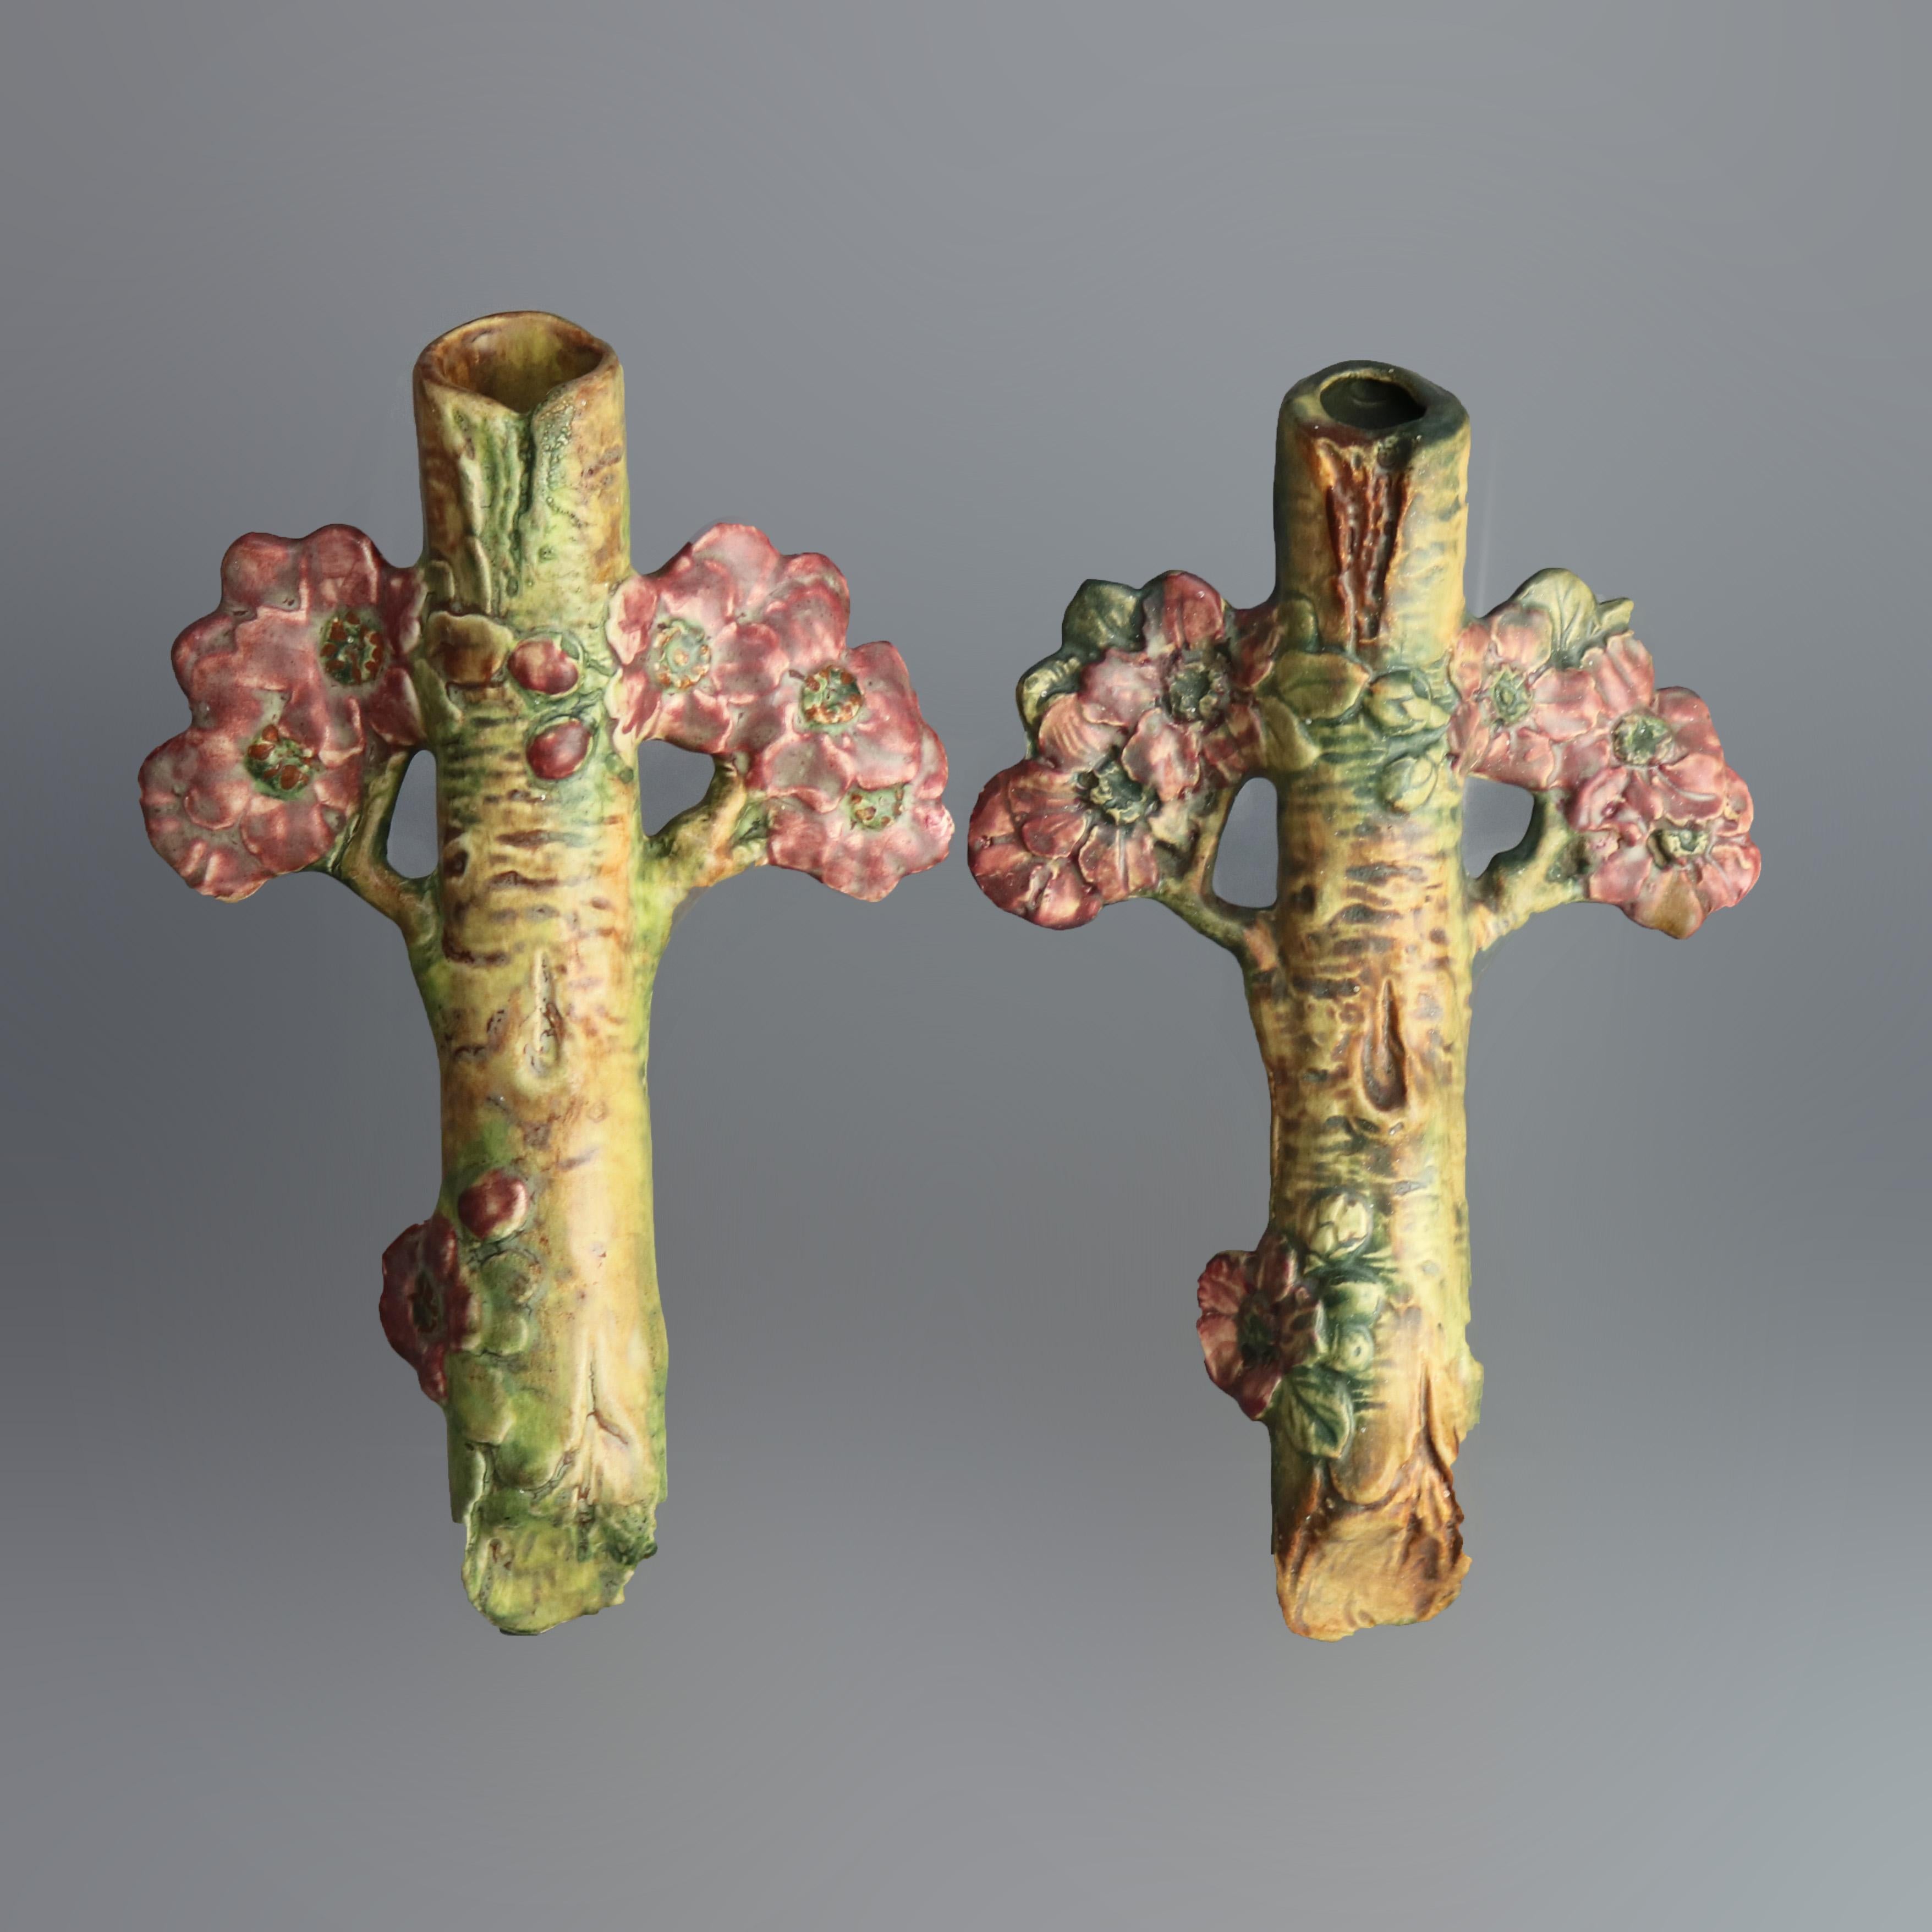 An antique pair of Weller Woodcraft art pottery wall pockets offer branch for with apple blossoms, marked as photographed, circa 1930

Measures: 9